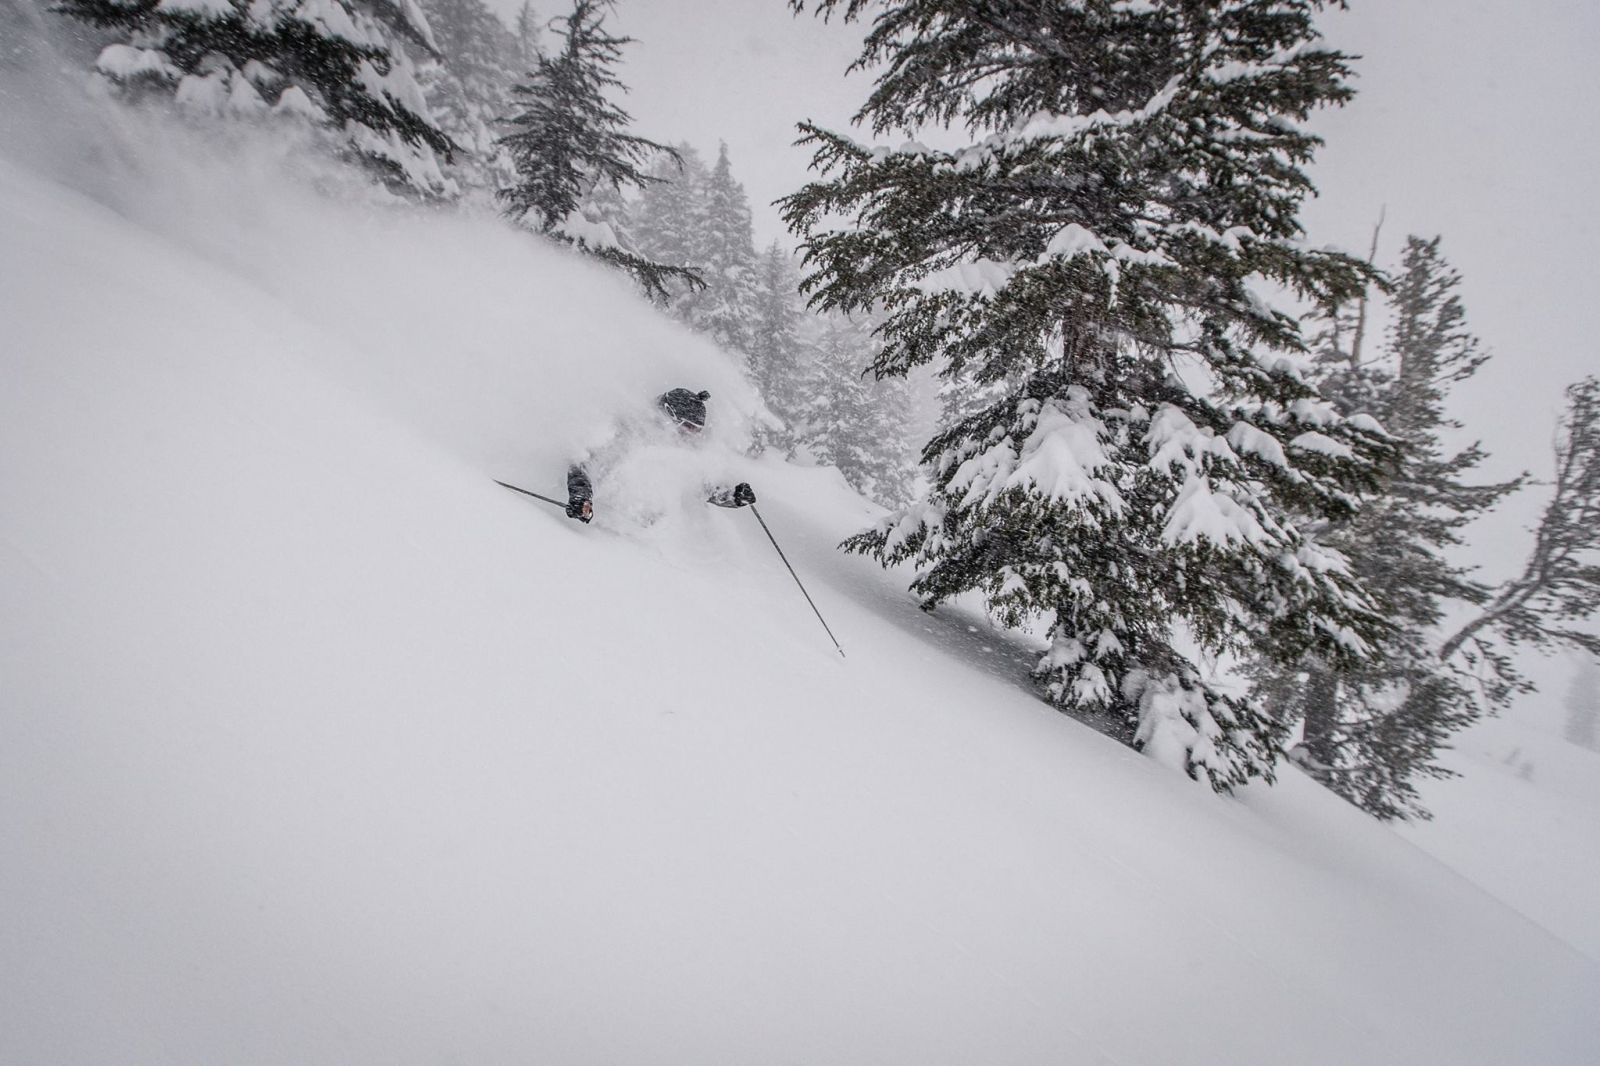 Mountain Collective pass has a collection of 16 resorts - 2 days per resort plus a third day on the resort of your choice- Mammoth Mountain - Photo: Mountain Collective.